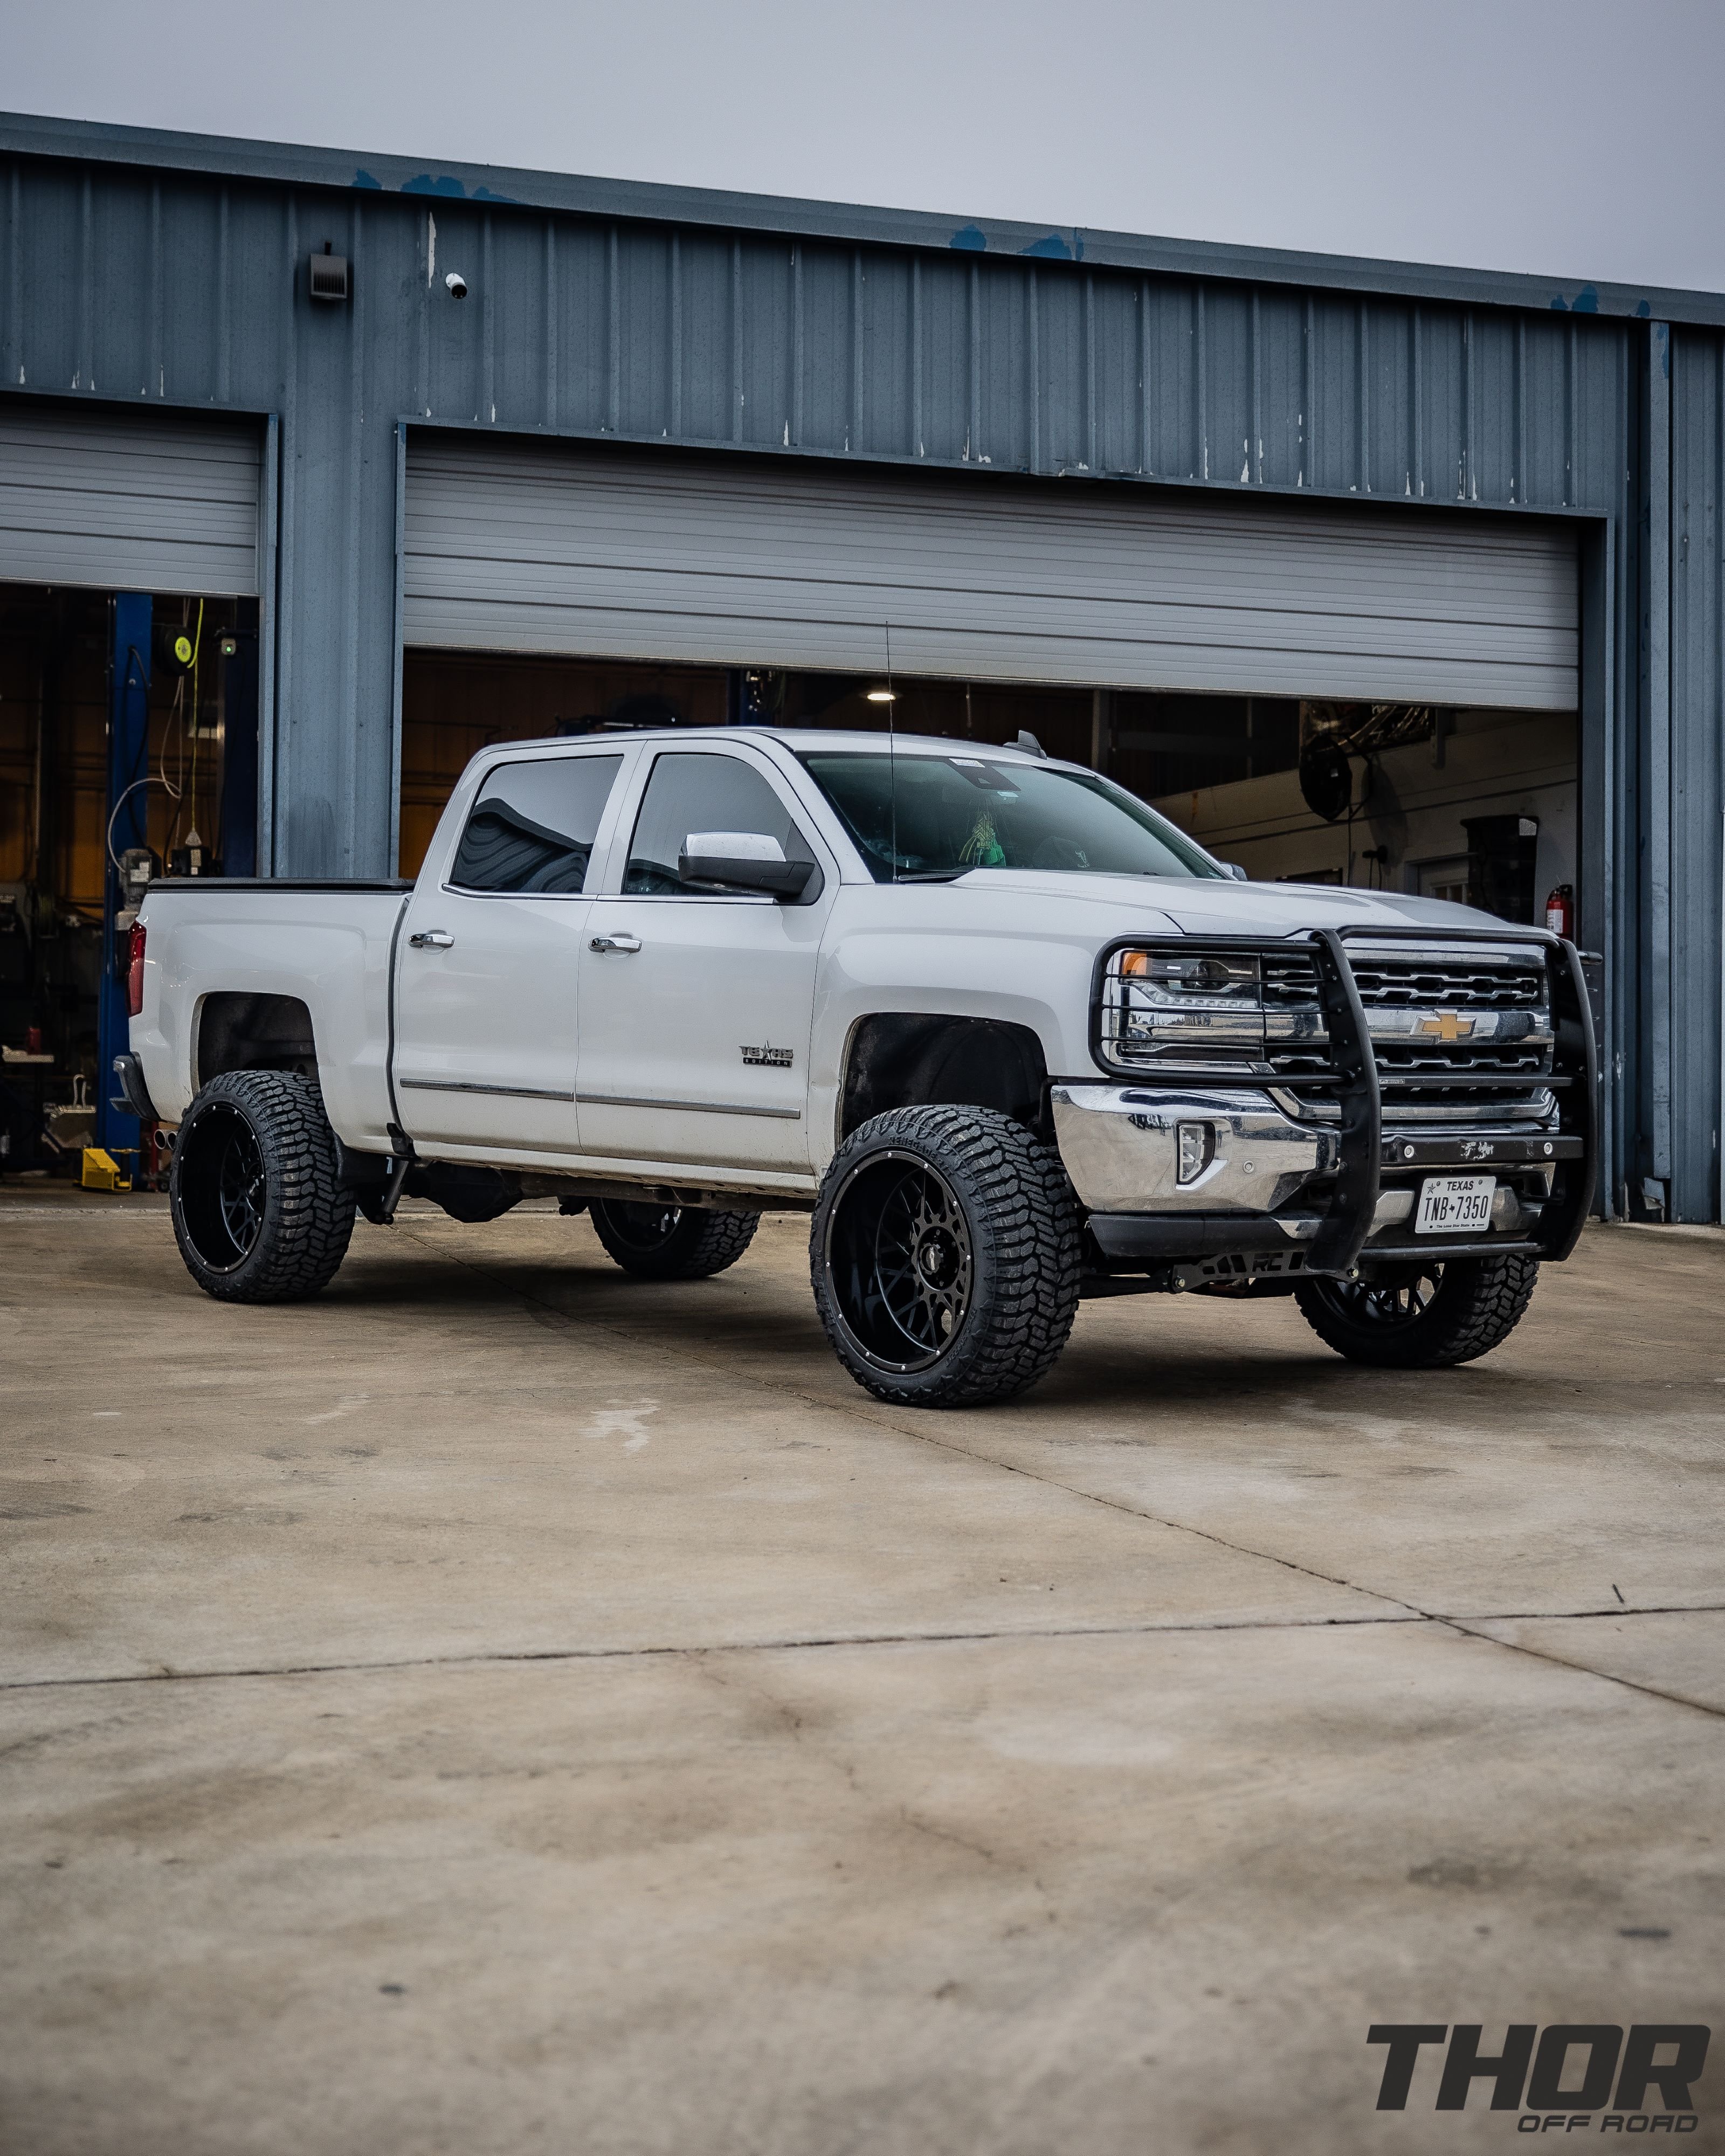 2018 Chevrolet Silverado 1500 in Silver with Rough Country 5" Lift Kit